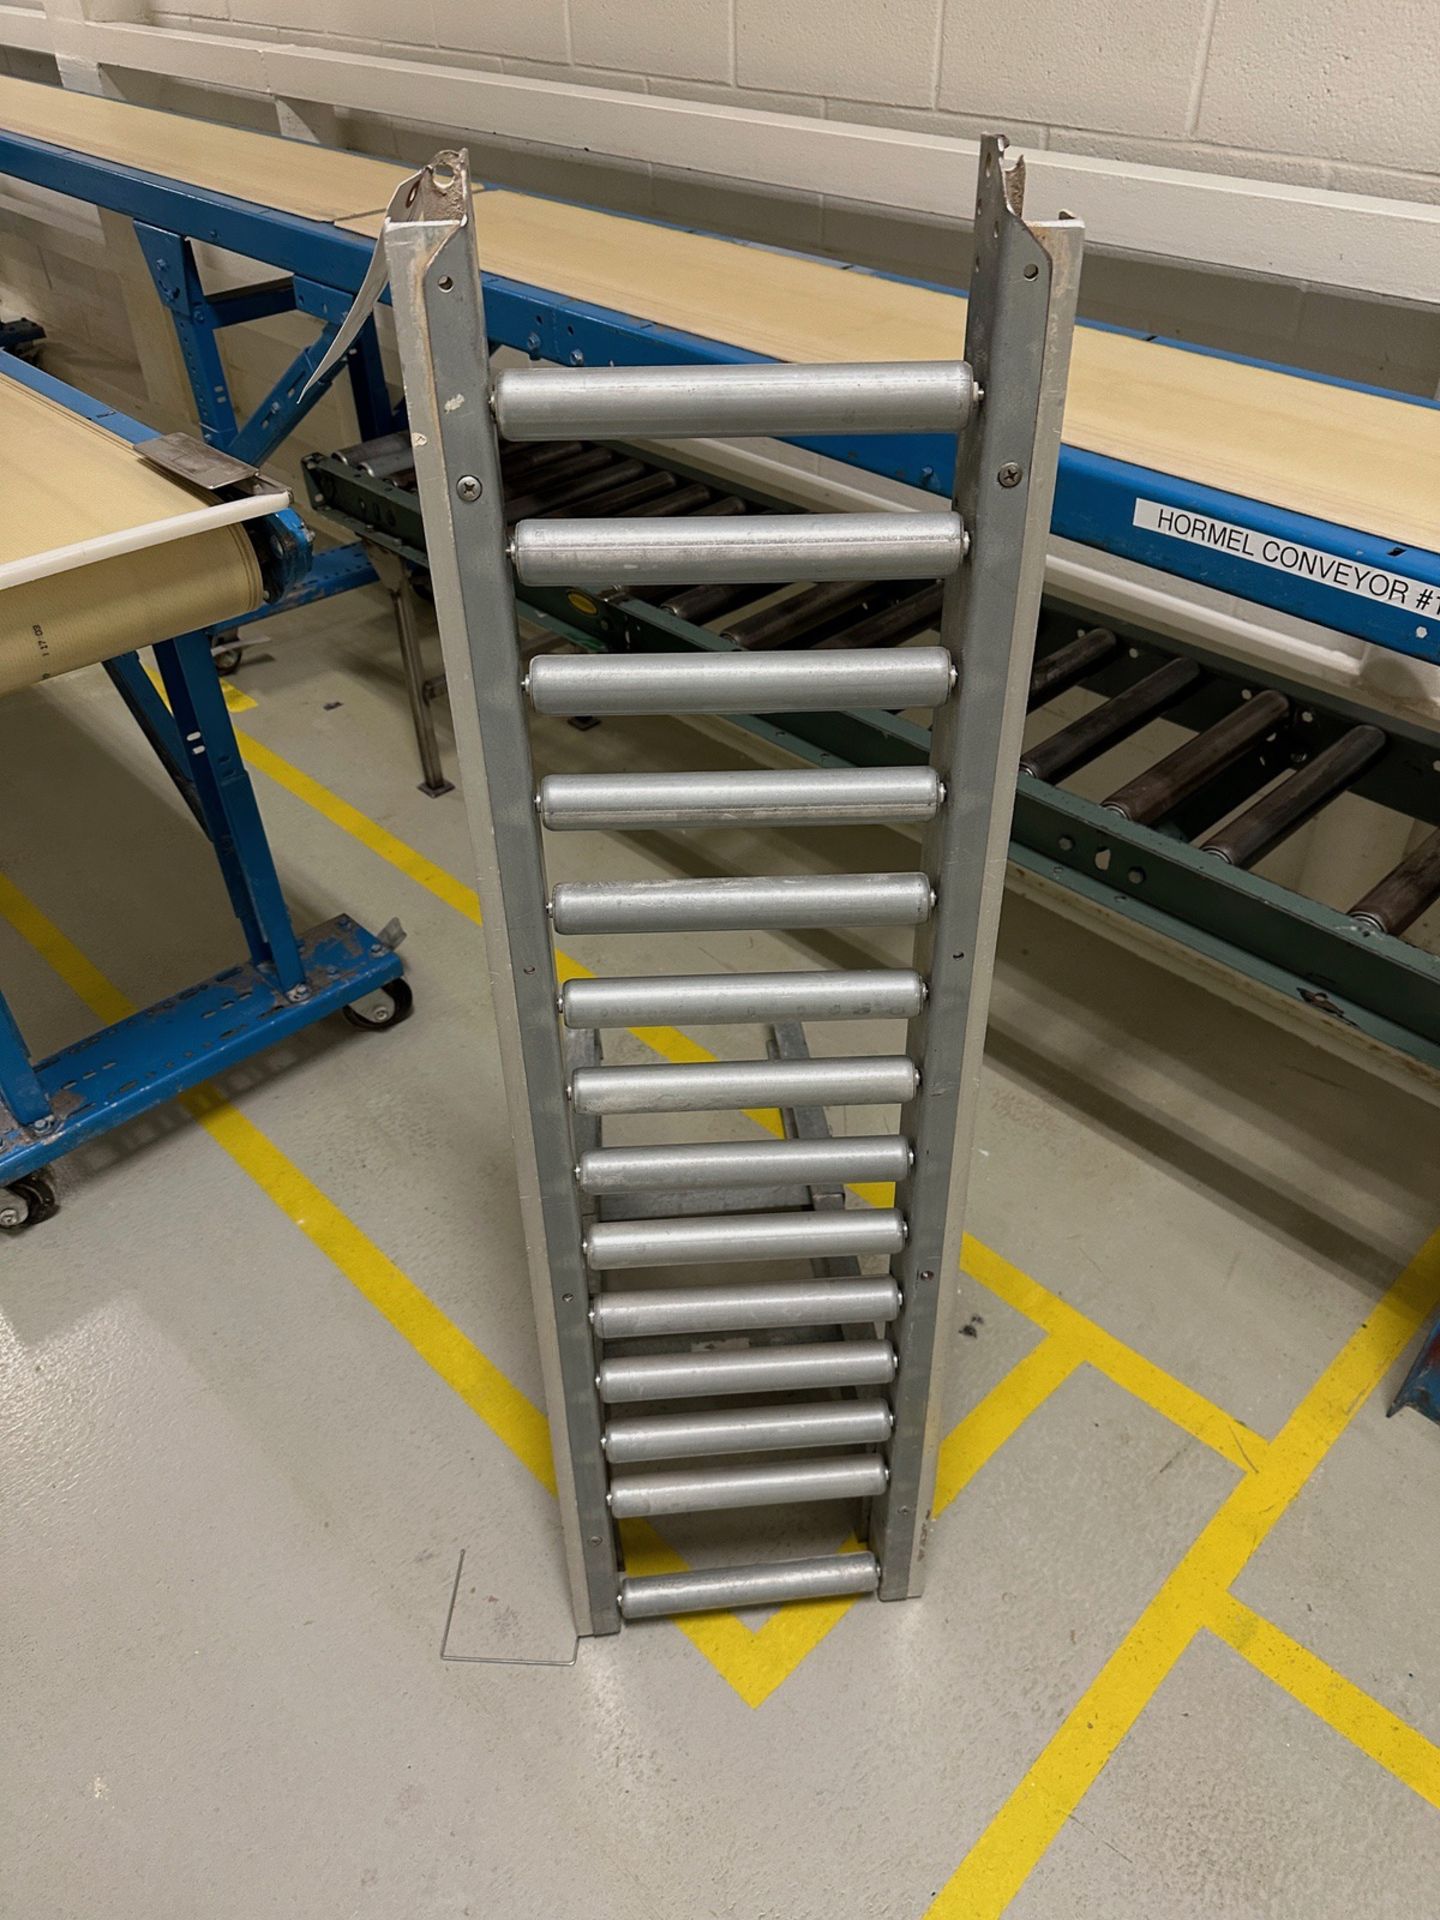 Lot of (2) Roller Conveyors - (1) 10" x 45" and (1) 13" x 7' | Rig Fee $20